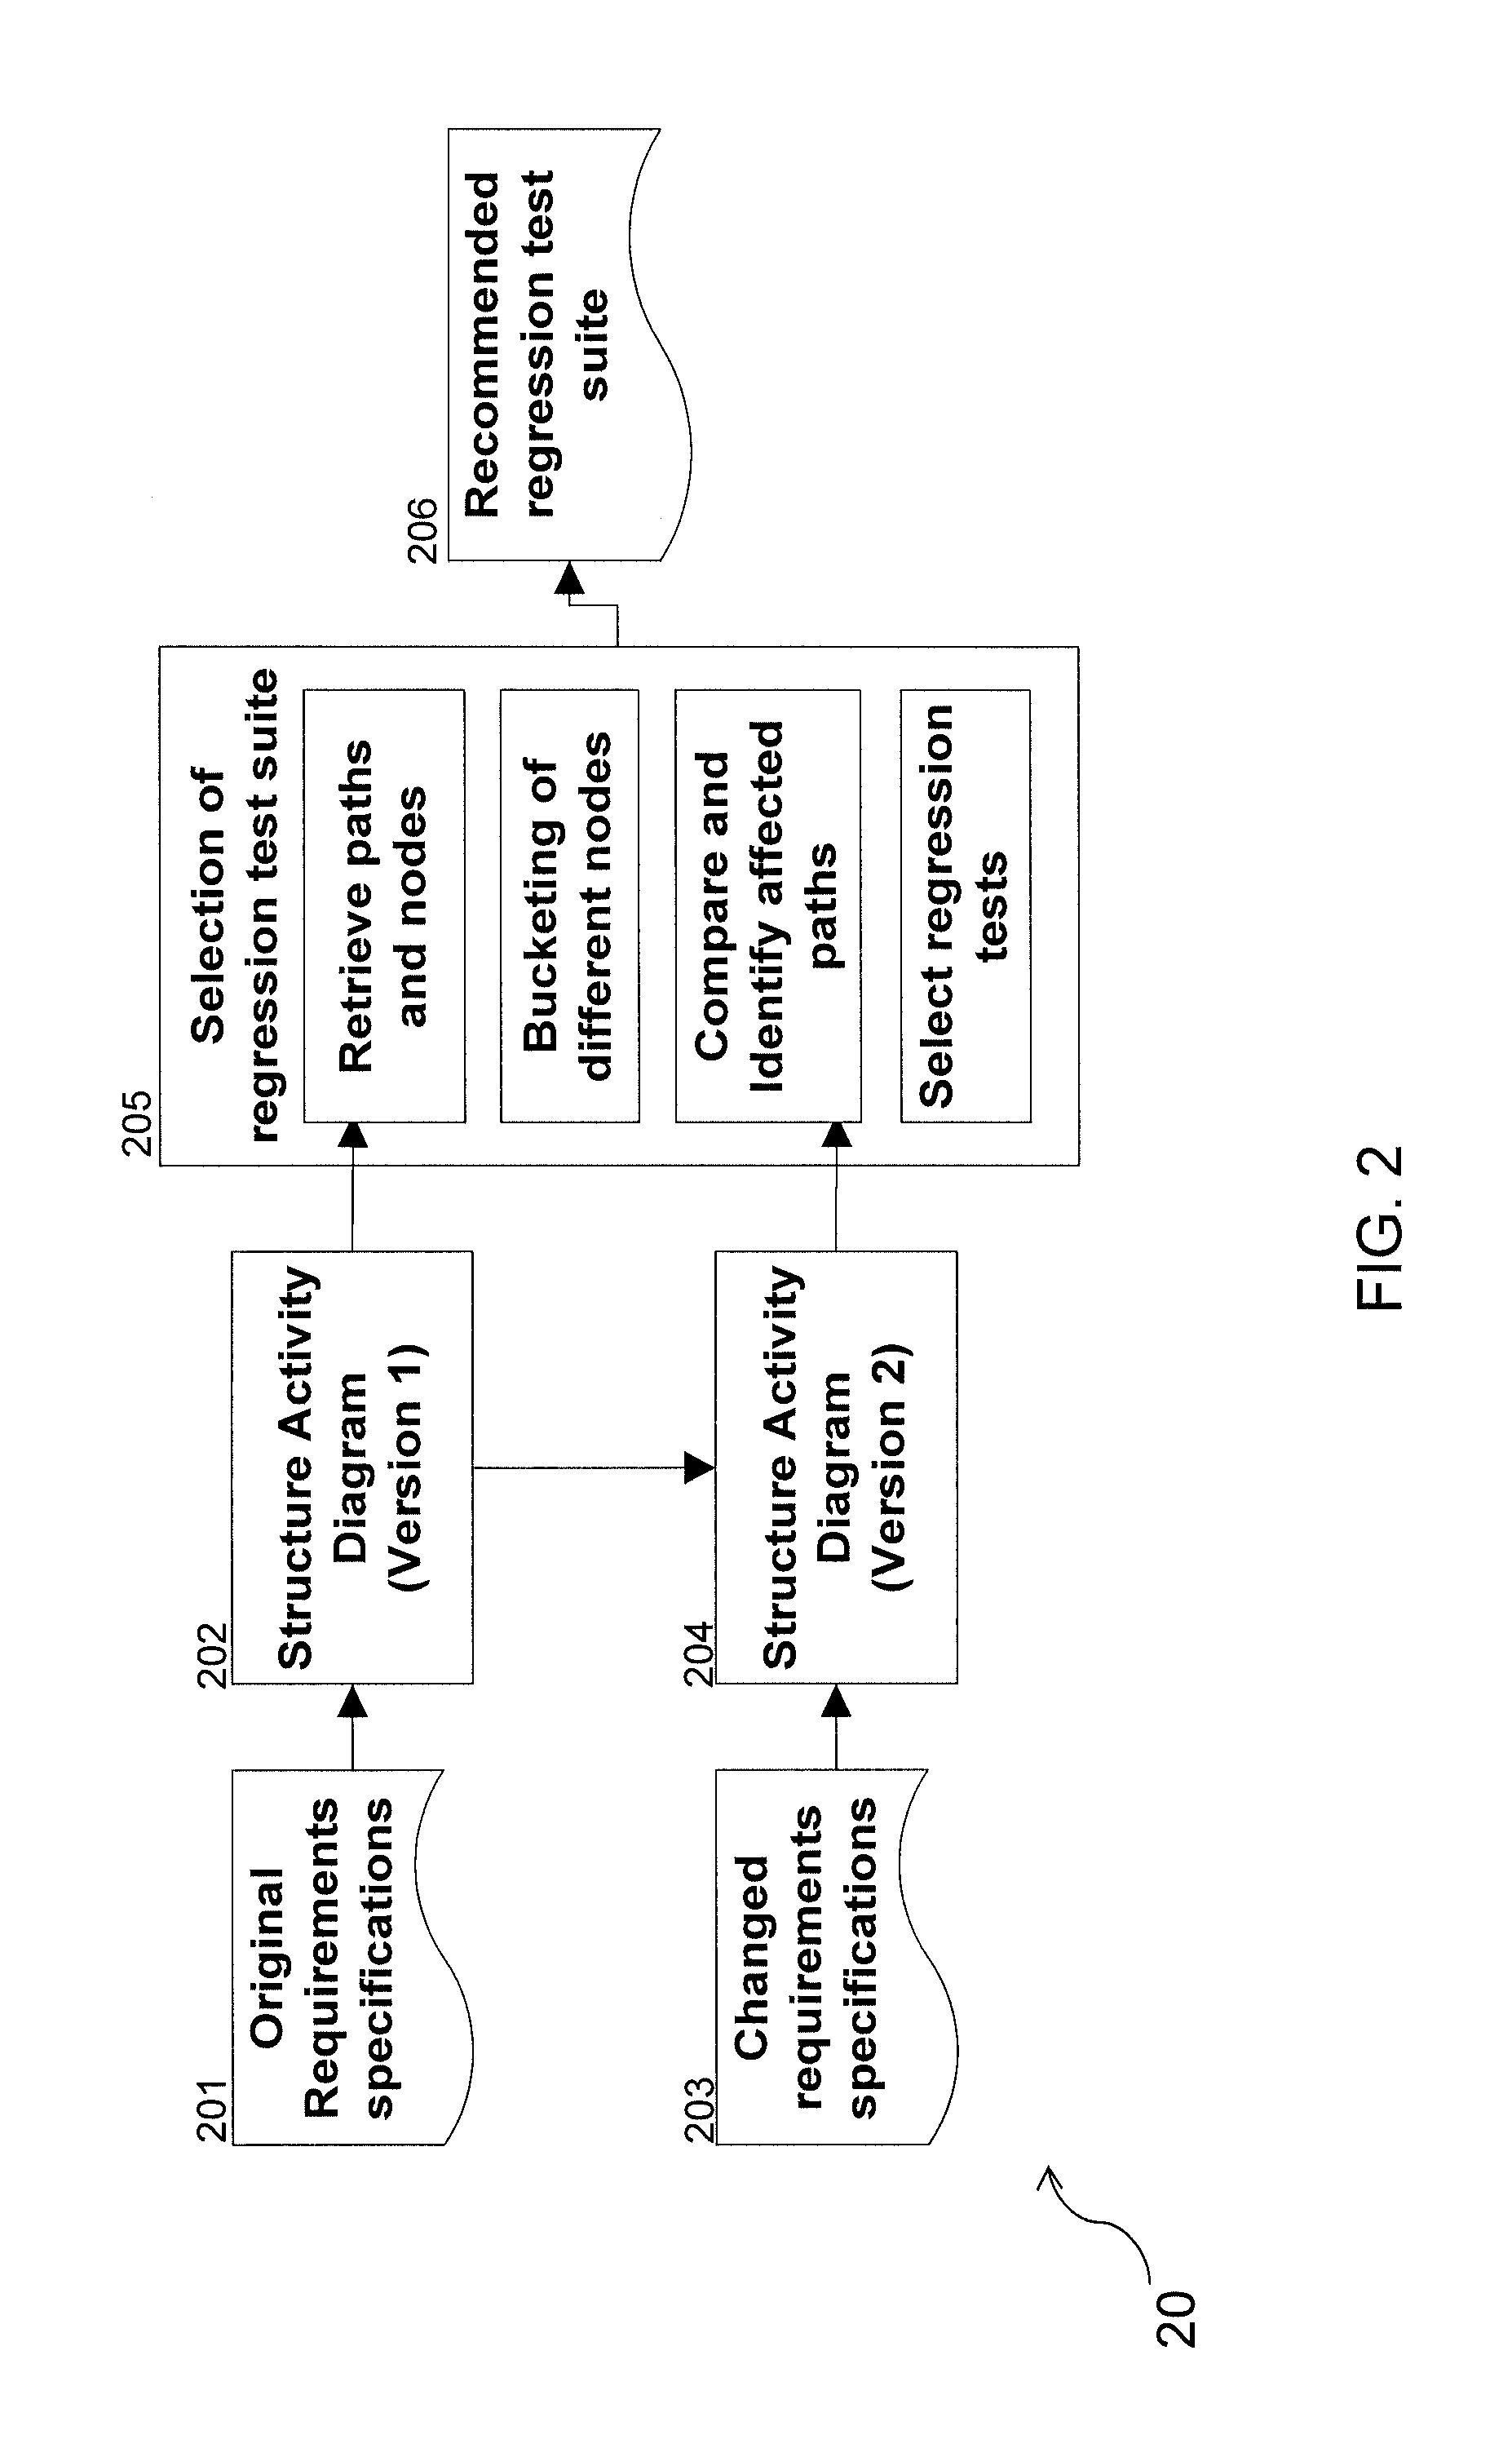 Method and system for identifying regression test cases for a software